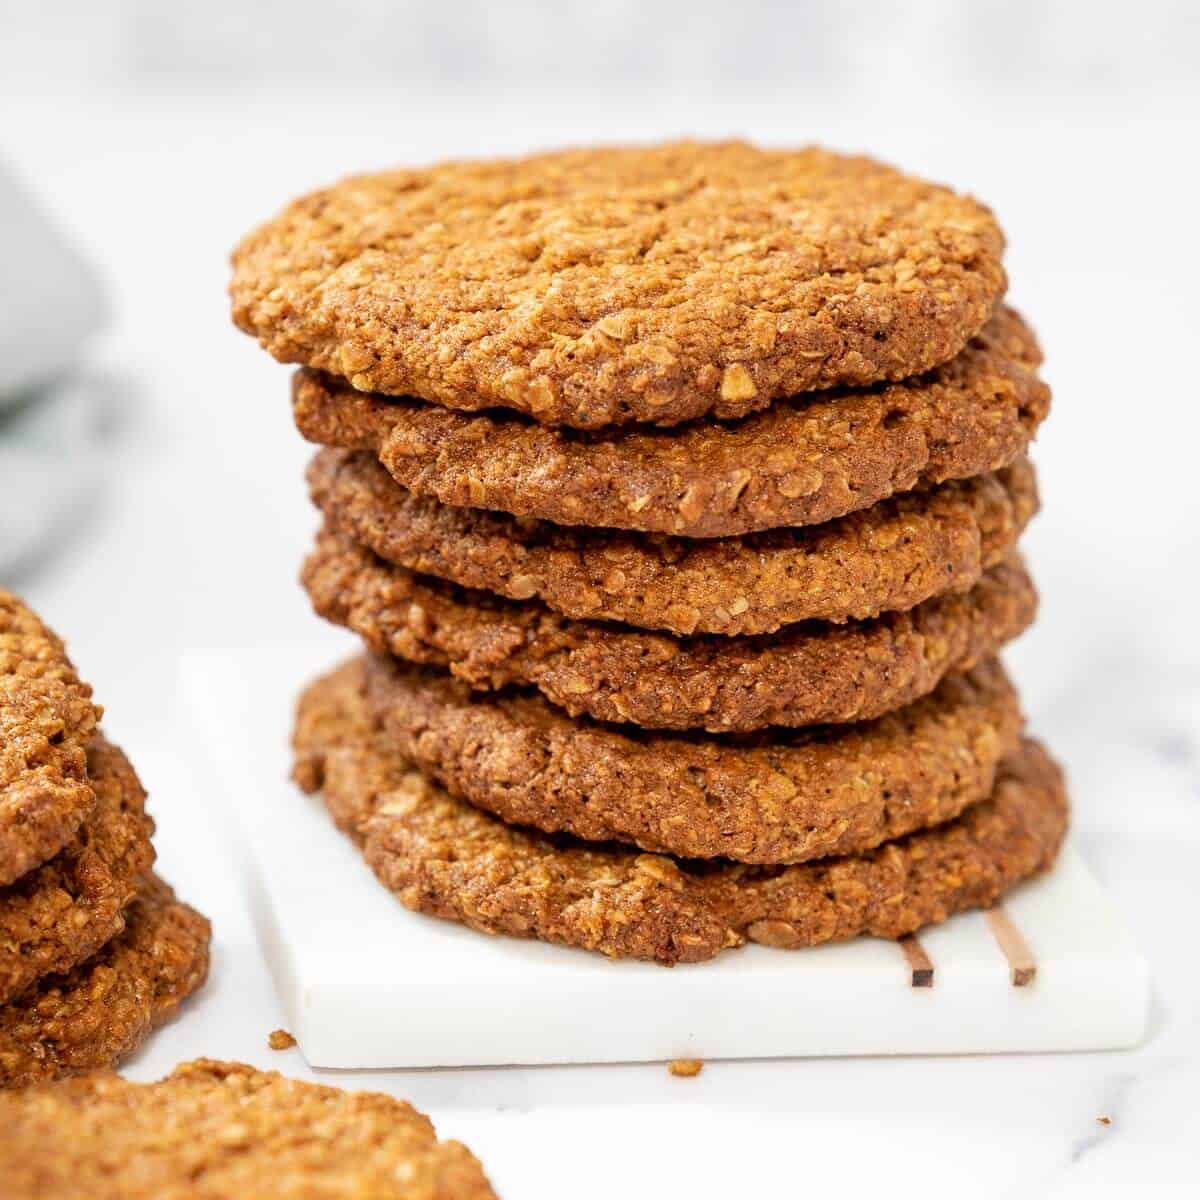 anzac biscuits stacked in a pile on a plate